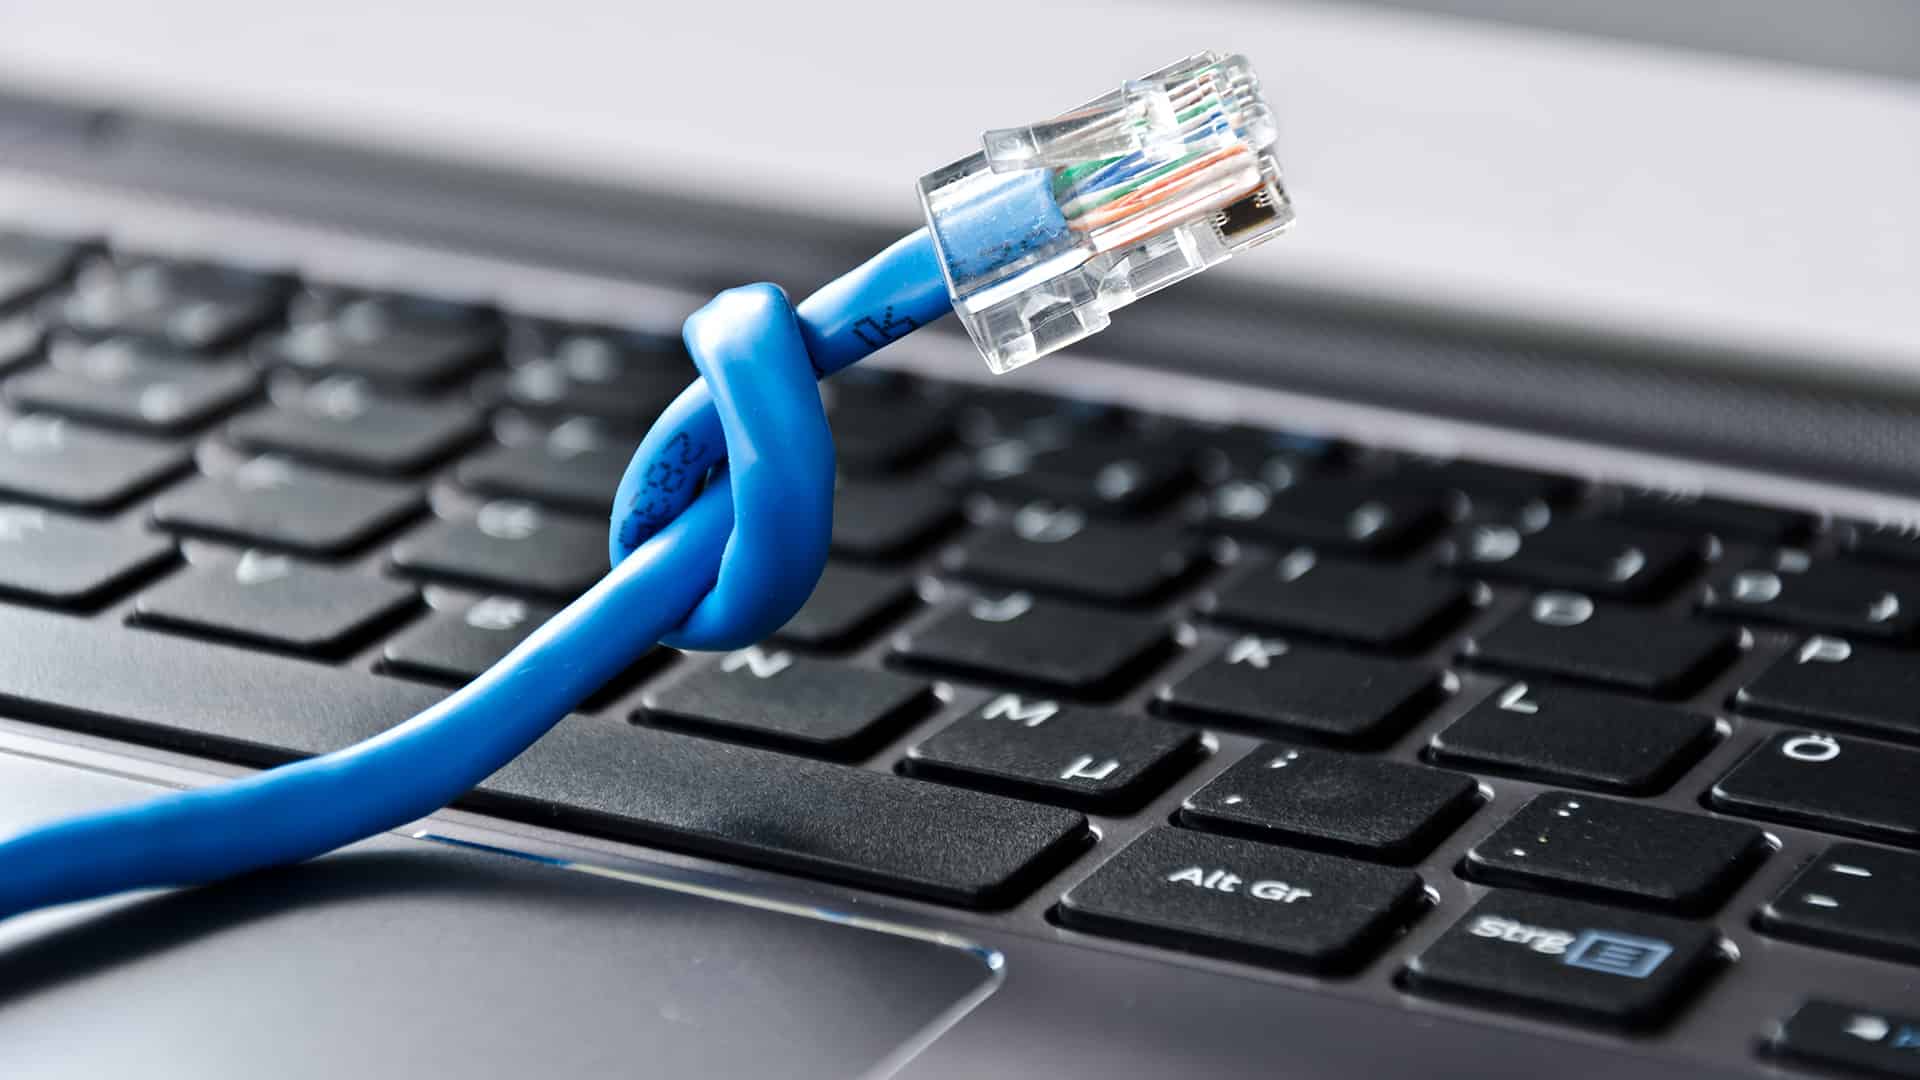 Twisted Ethernet cable on top of a laptop